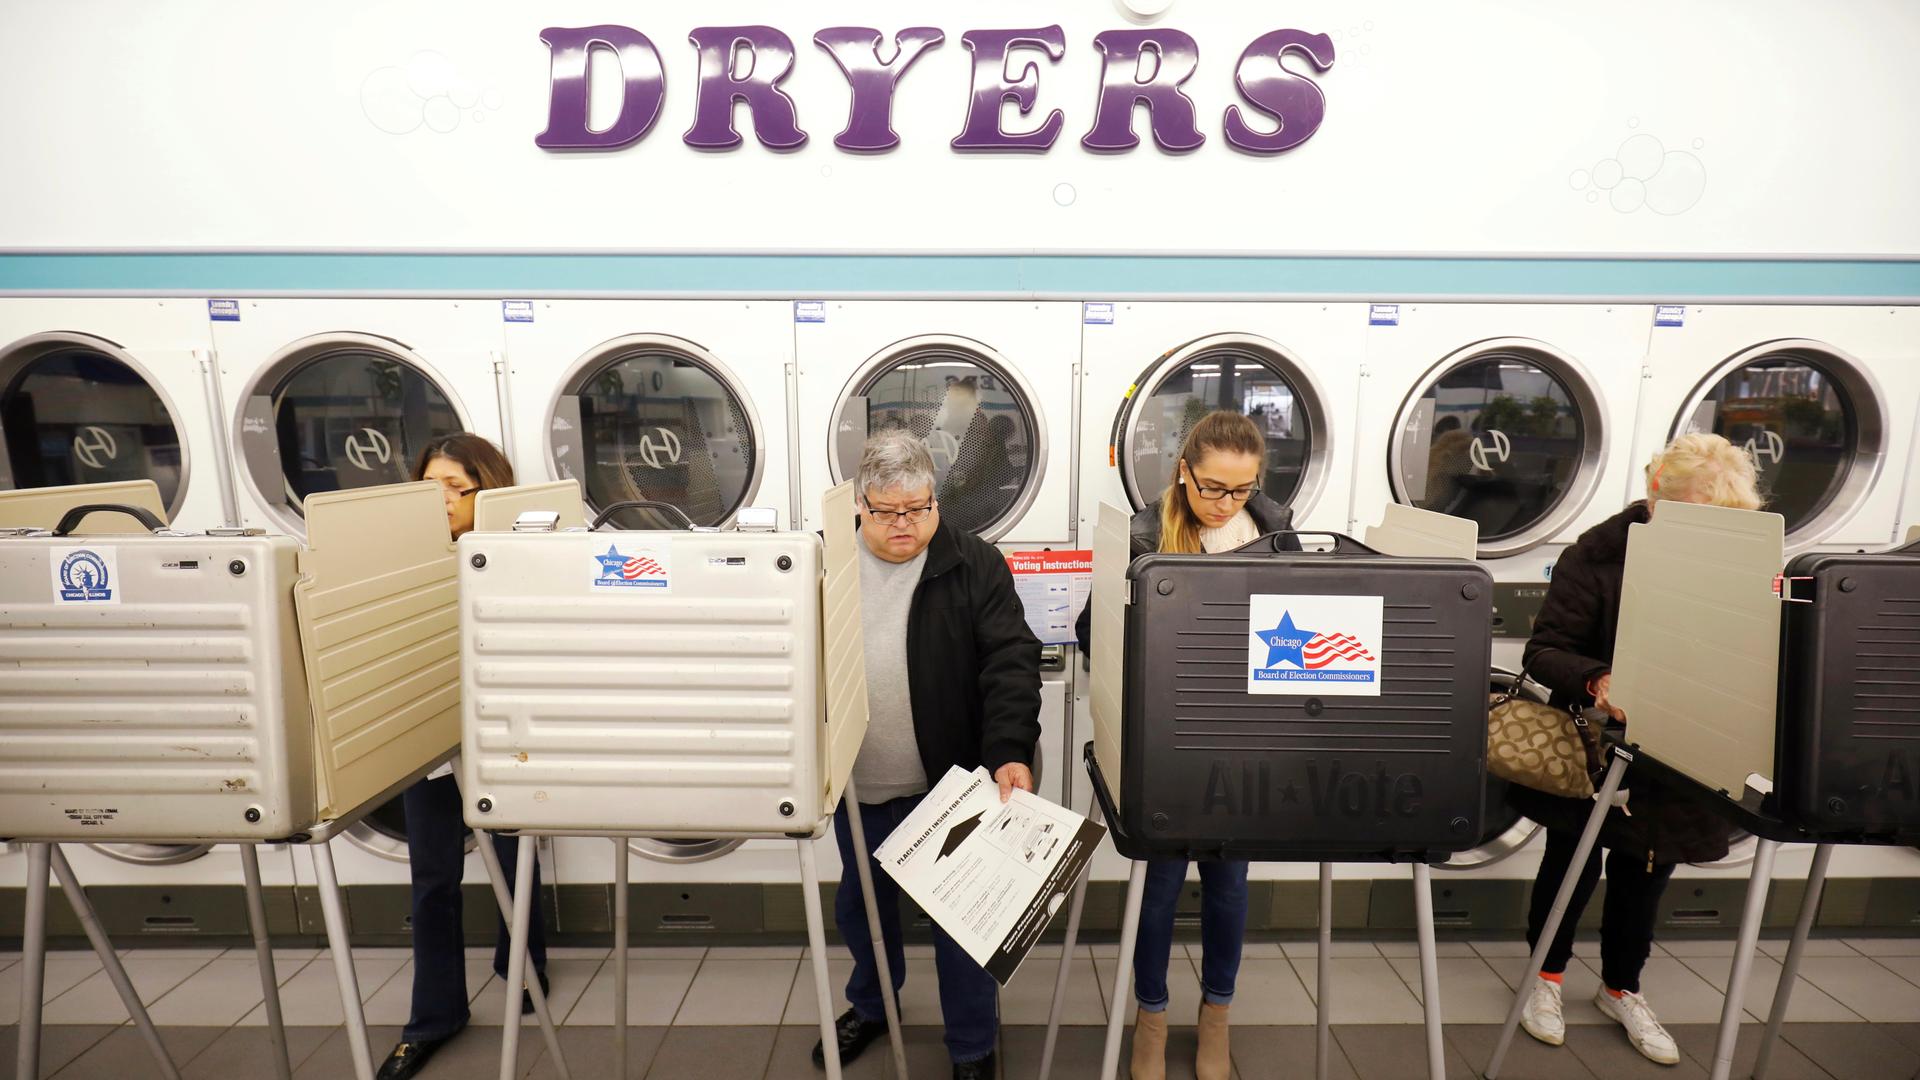 People stand in voting booth casting ballots 